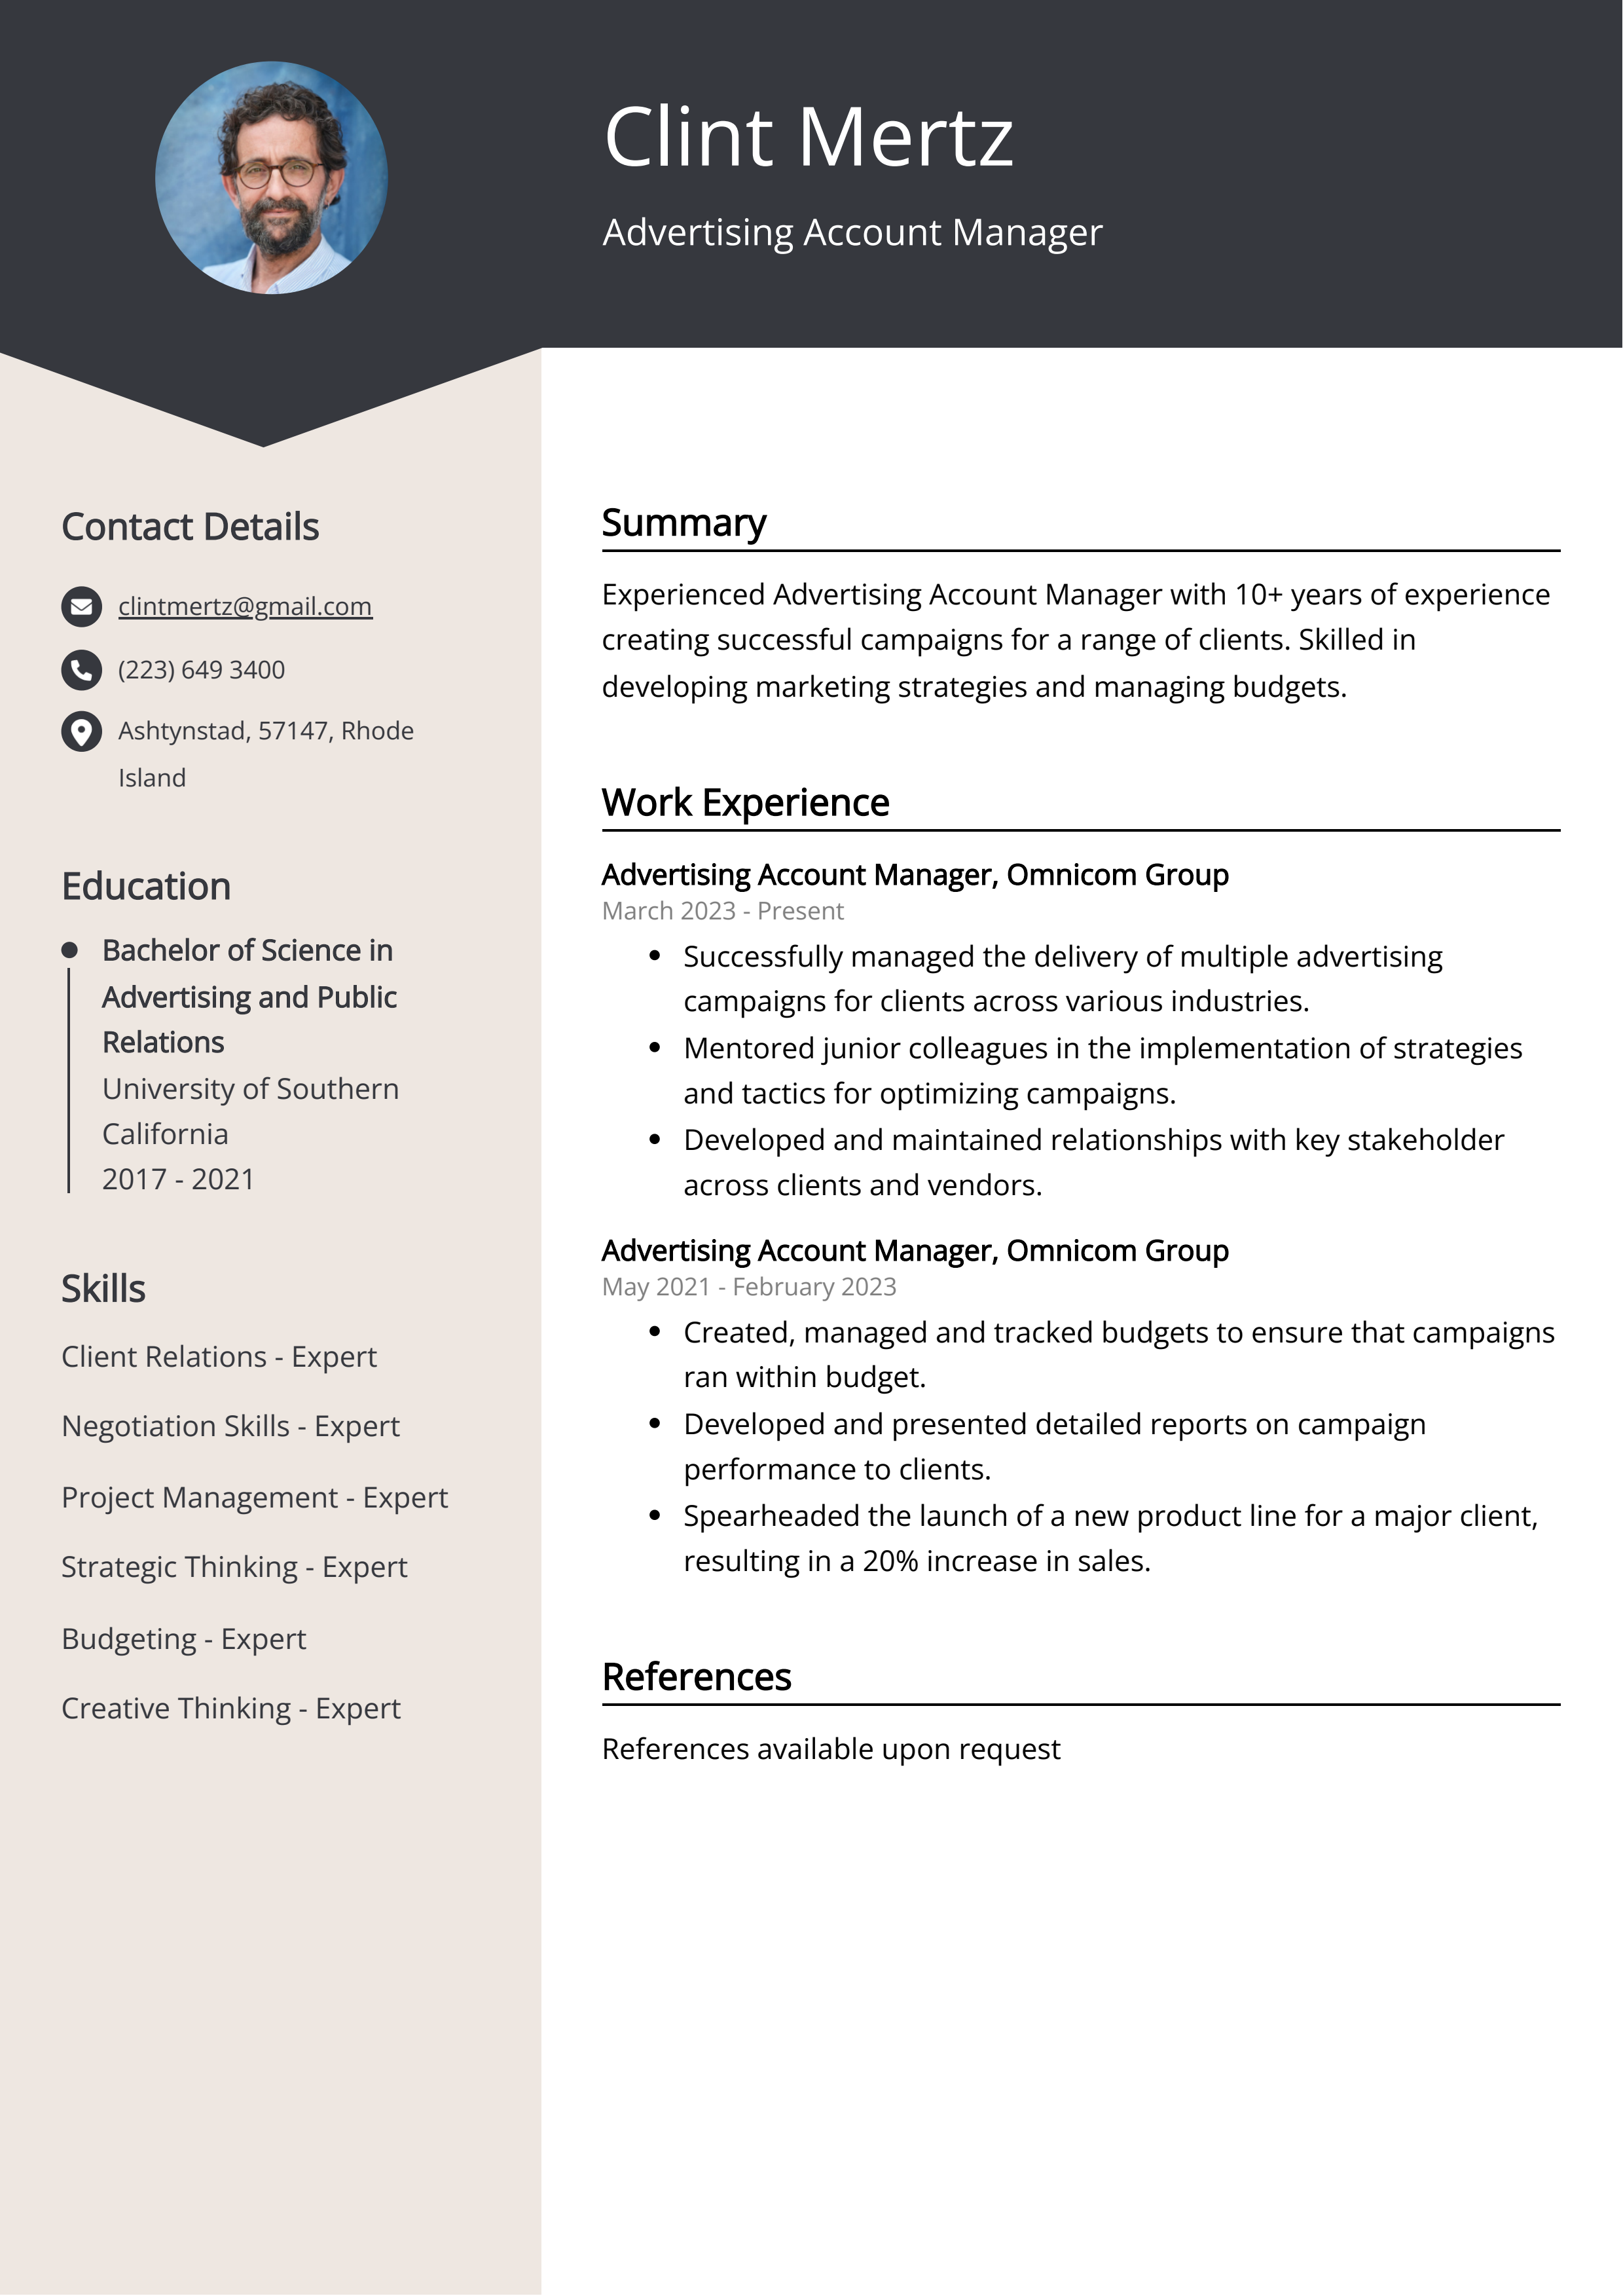 Advertising Account Manager CV Example